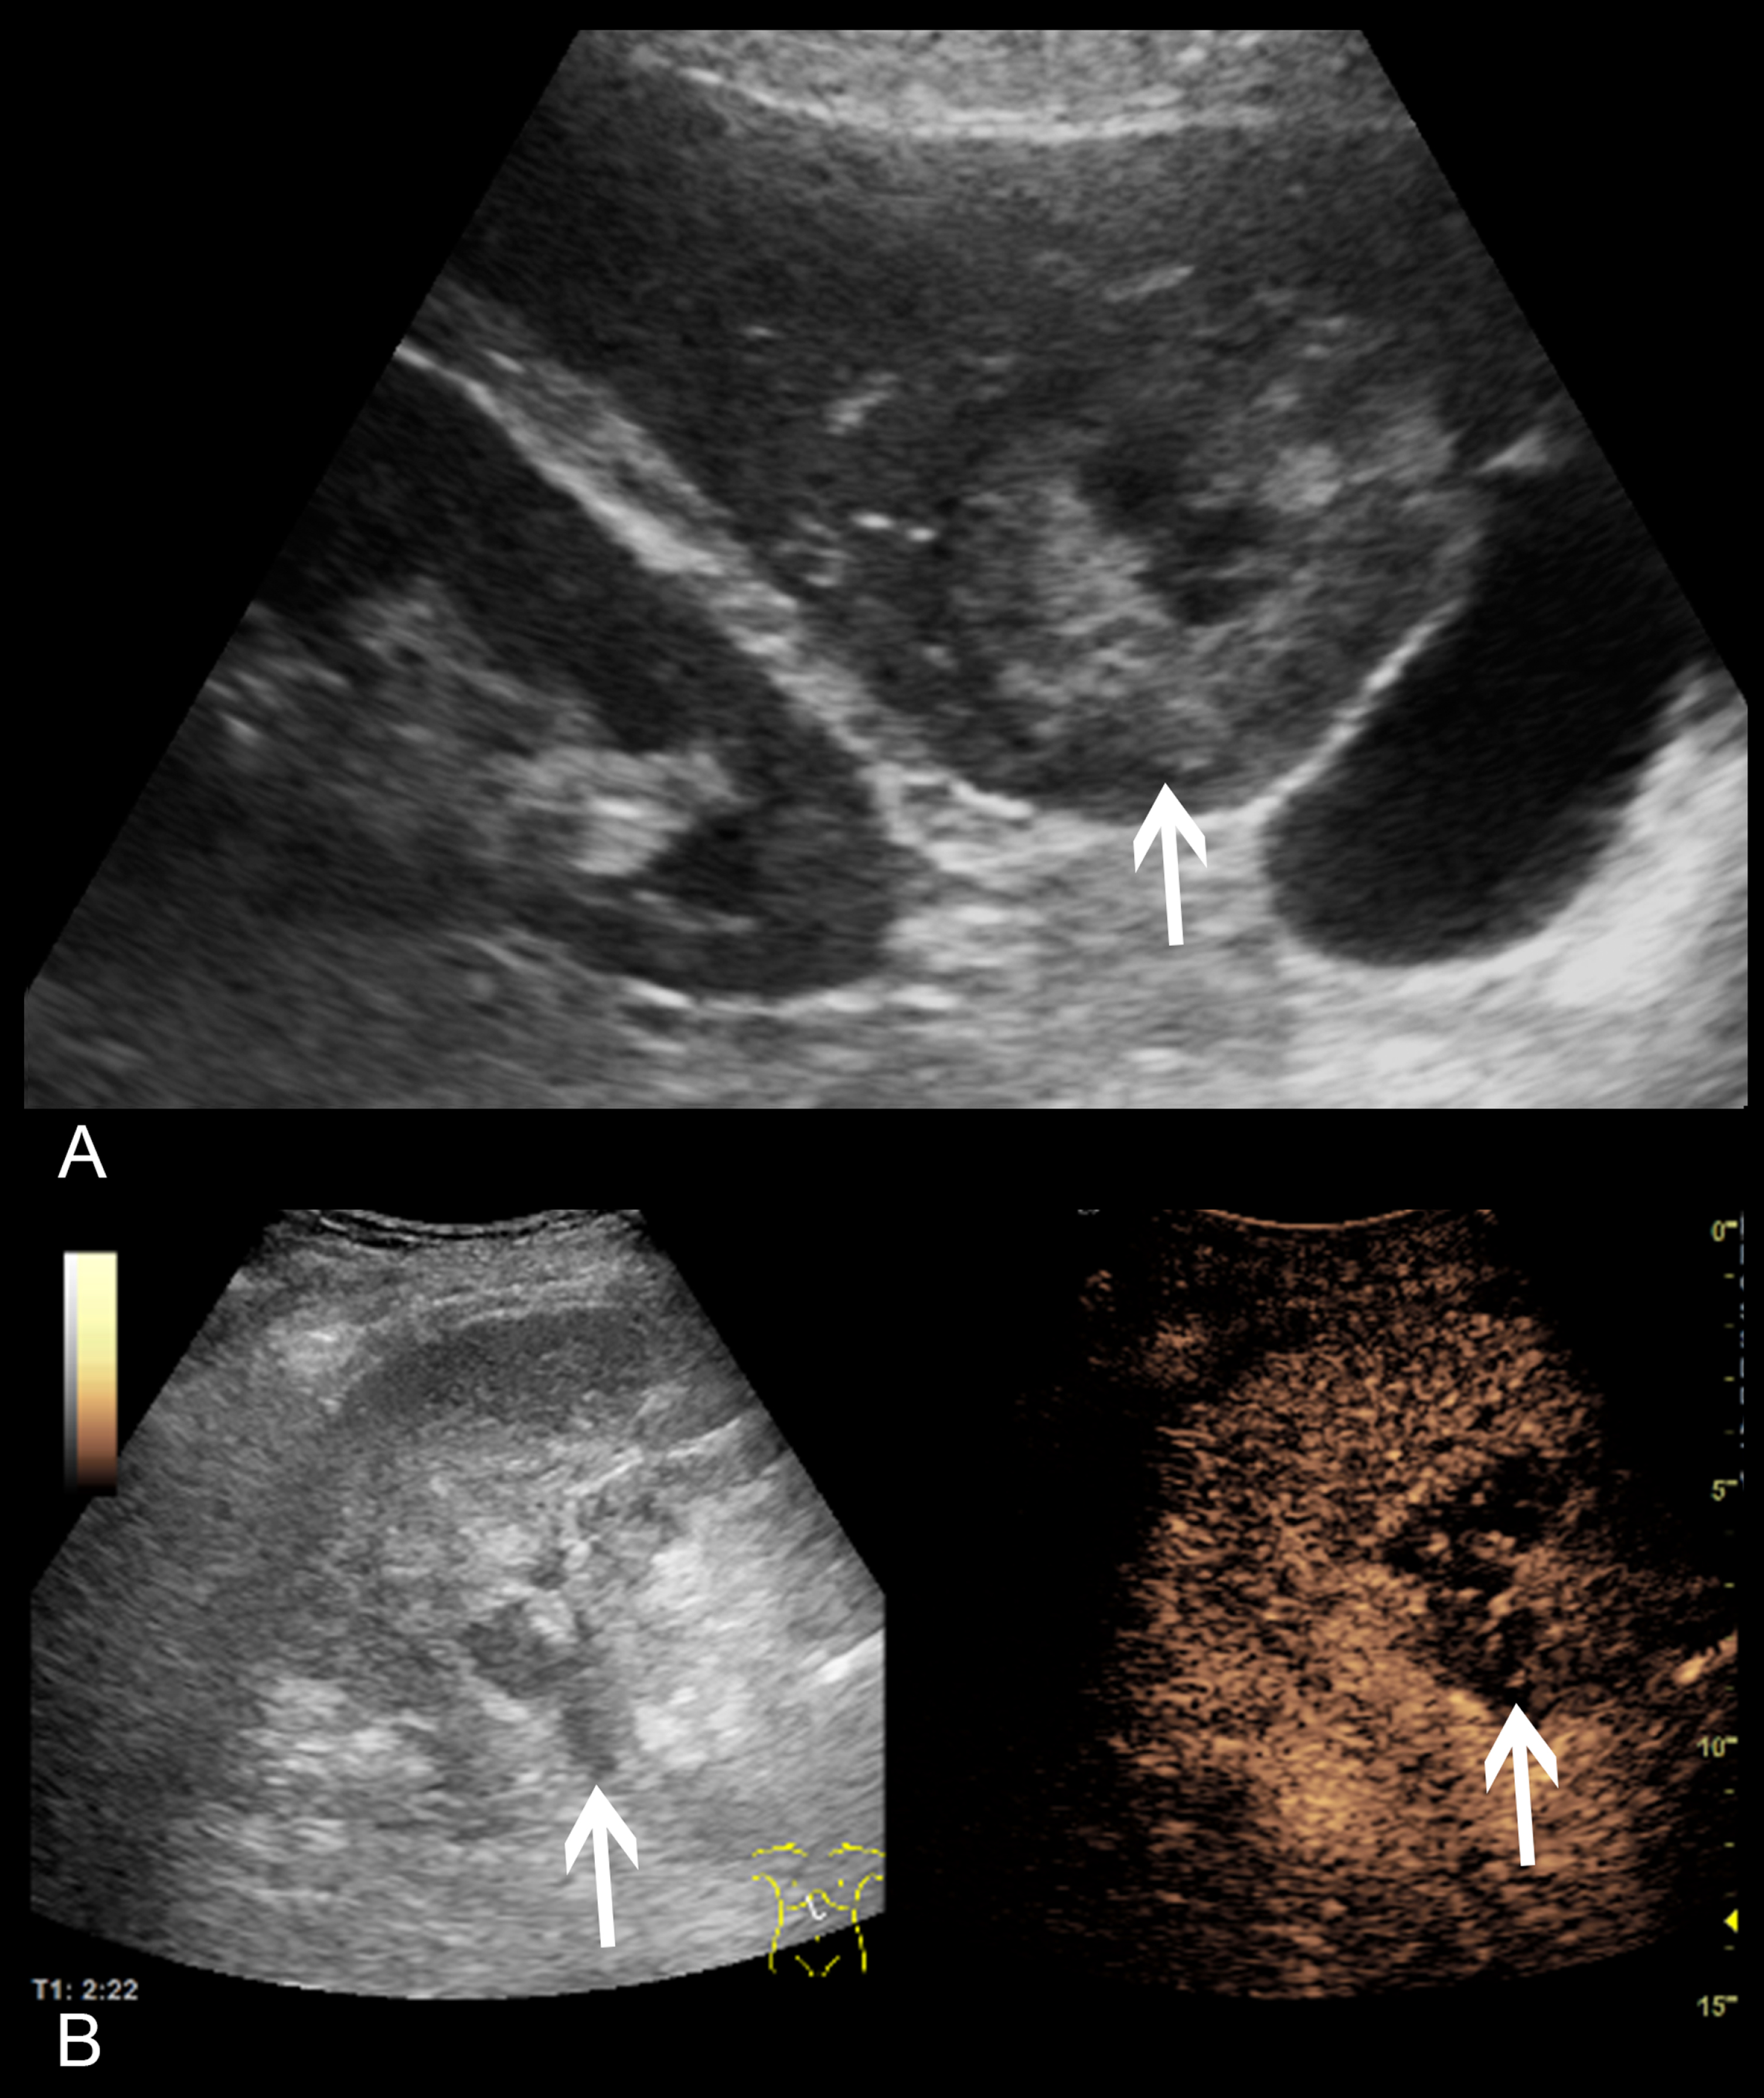 61 year old patient with previous liver transplantation, admitted to our hospital with fever of unknown origin. A: Vscan image showed a large partially hyperechogenic mass with central hypoechogenicity and adjacent free abdominal fluid. Image quality showed only minor diagnostics limitations (3). B: High-end ultrasound with CEUS revealed several hypoechogenic lesions with profound enhancement in between. In correlation with an MRI scan, multiple cholangitic abscesses were confirmed. Image quality was found to be excellent (4). Pathologies are marked with an arrow.